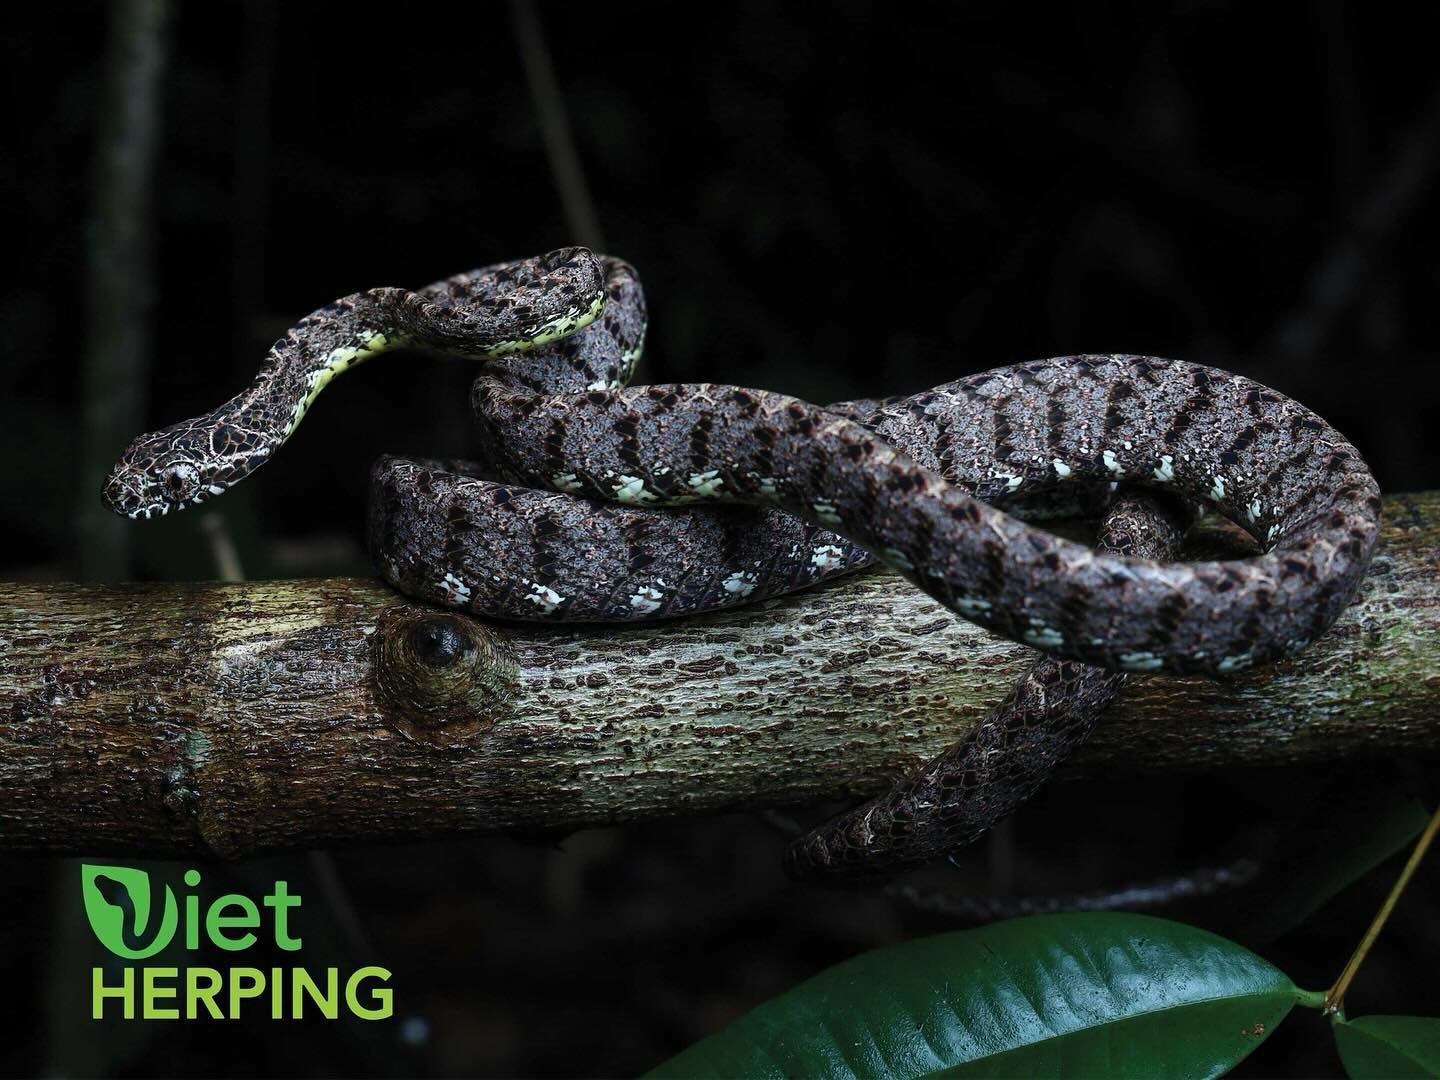 During our recent trip, we photographed a Jasper cat snake, a rare snake species from Vietnam.

#instagood #photooftheday #beautiful #nature #tour #venomous #tropicalherping #mantisofinstagram  #herping #herpingtheglobe #vietnam #snake #photography #